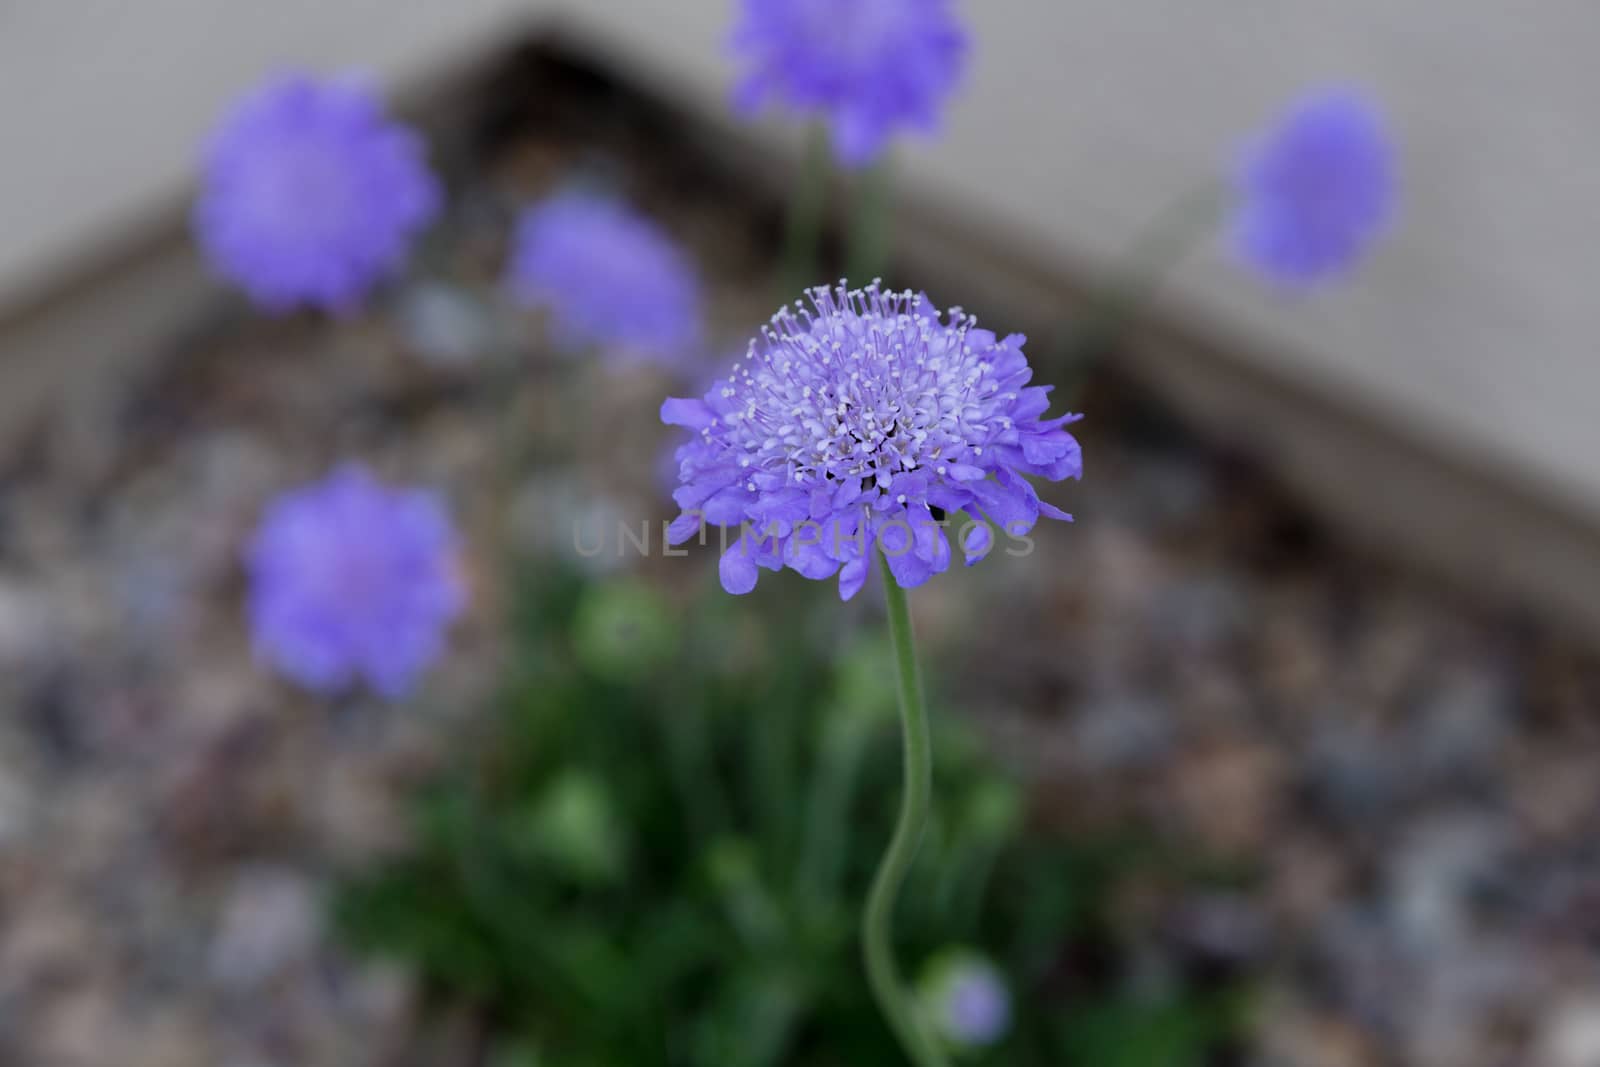 Selective focus on single blossom of  Butterfly blue scabiosa flower. Compact perennial in unusual blue and purple hues. Walkway edge frames plant. Location is Tucson, Arizona, in America's Southwest. 